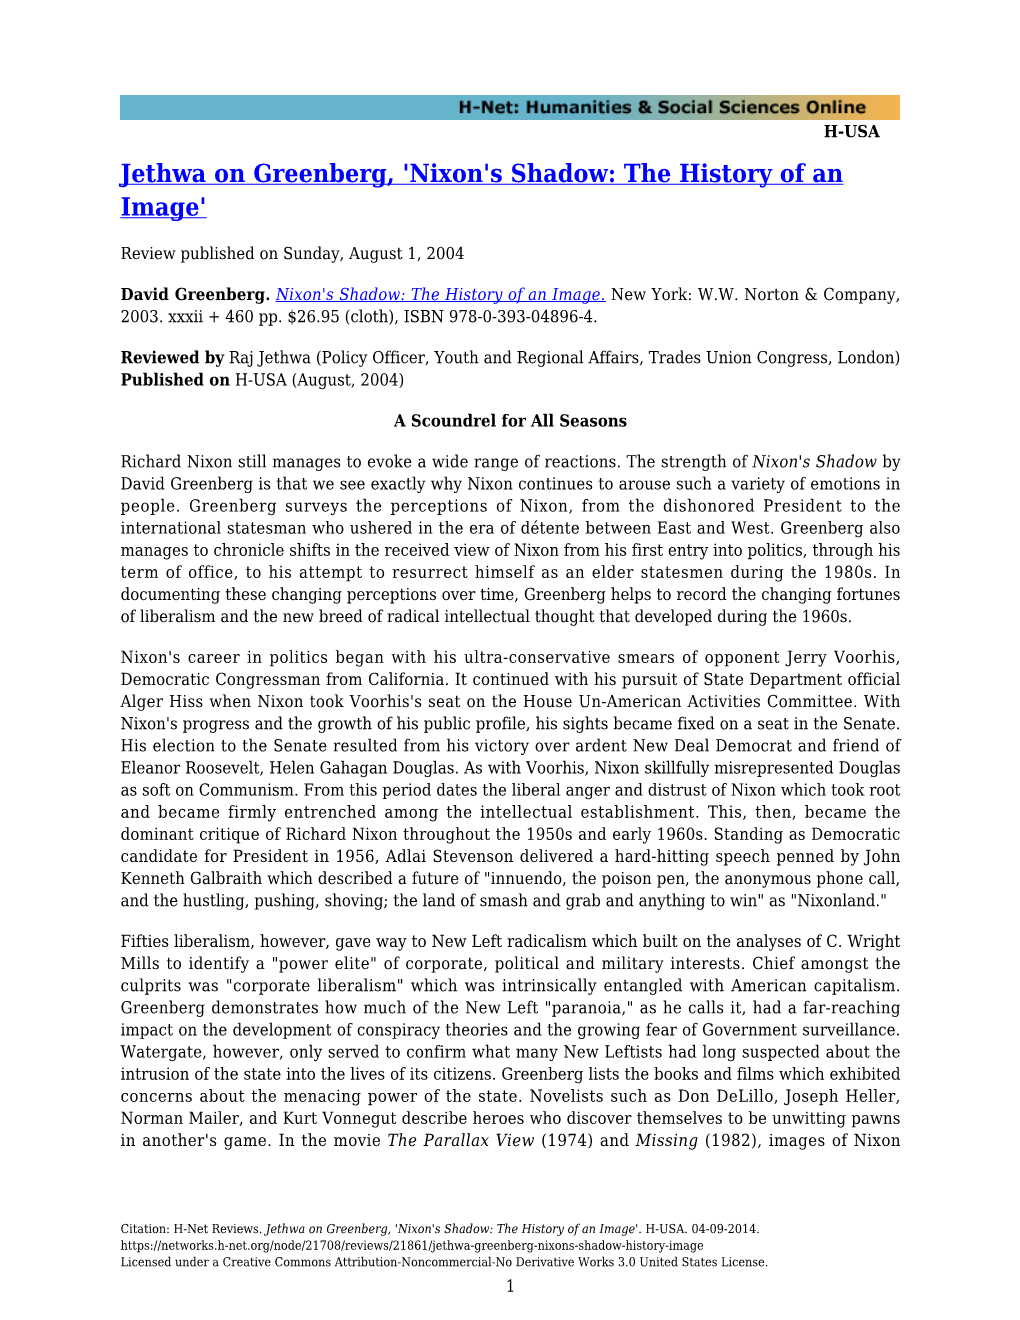 Jethwa on Greenberg, 'Nixon's Shadow: the History of an Image'